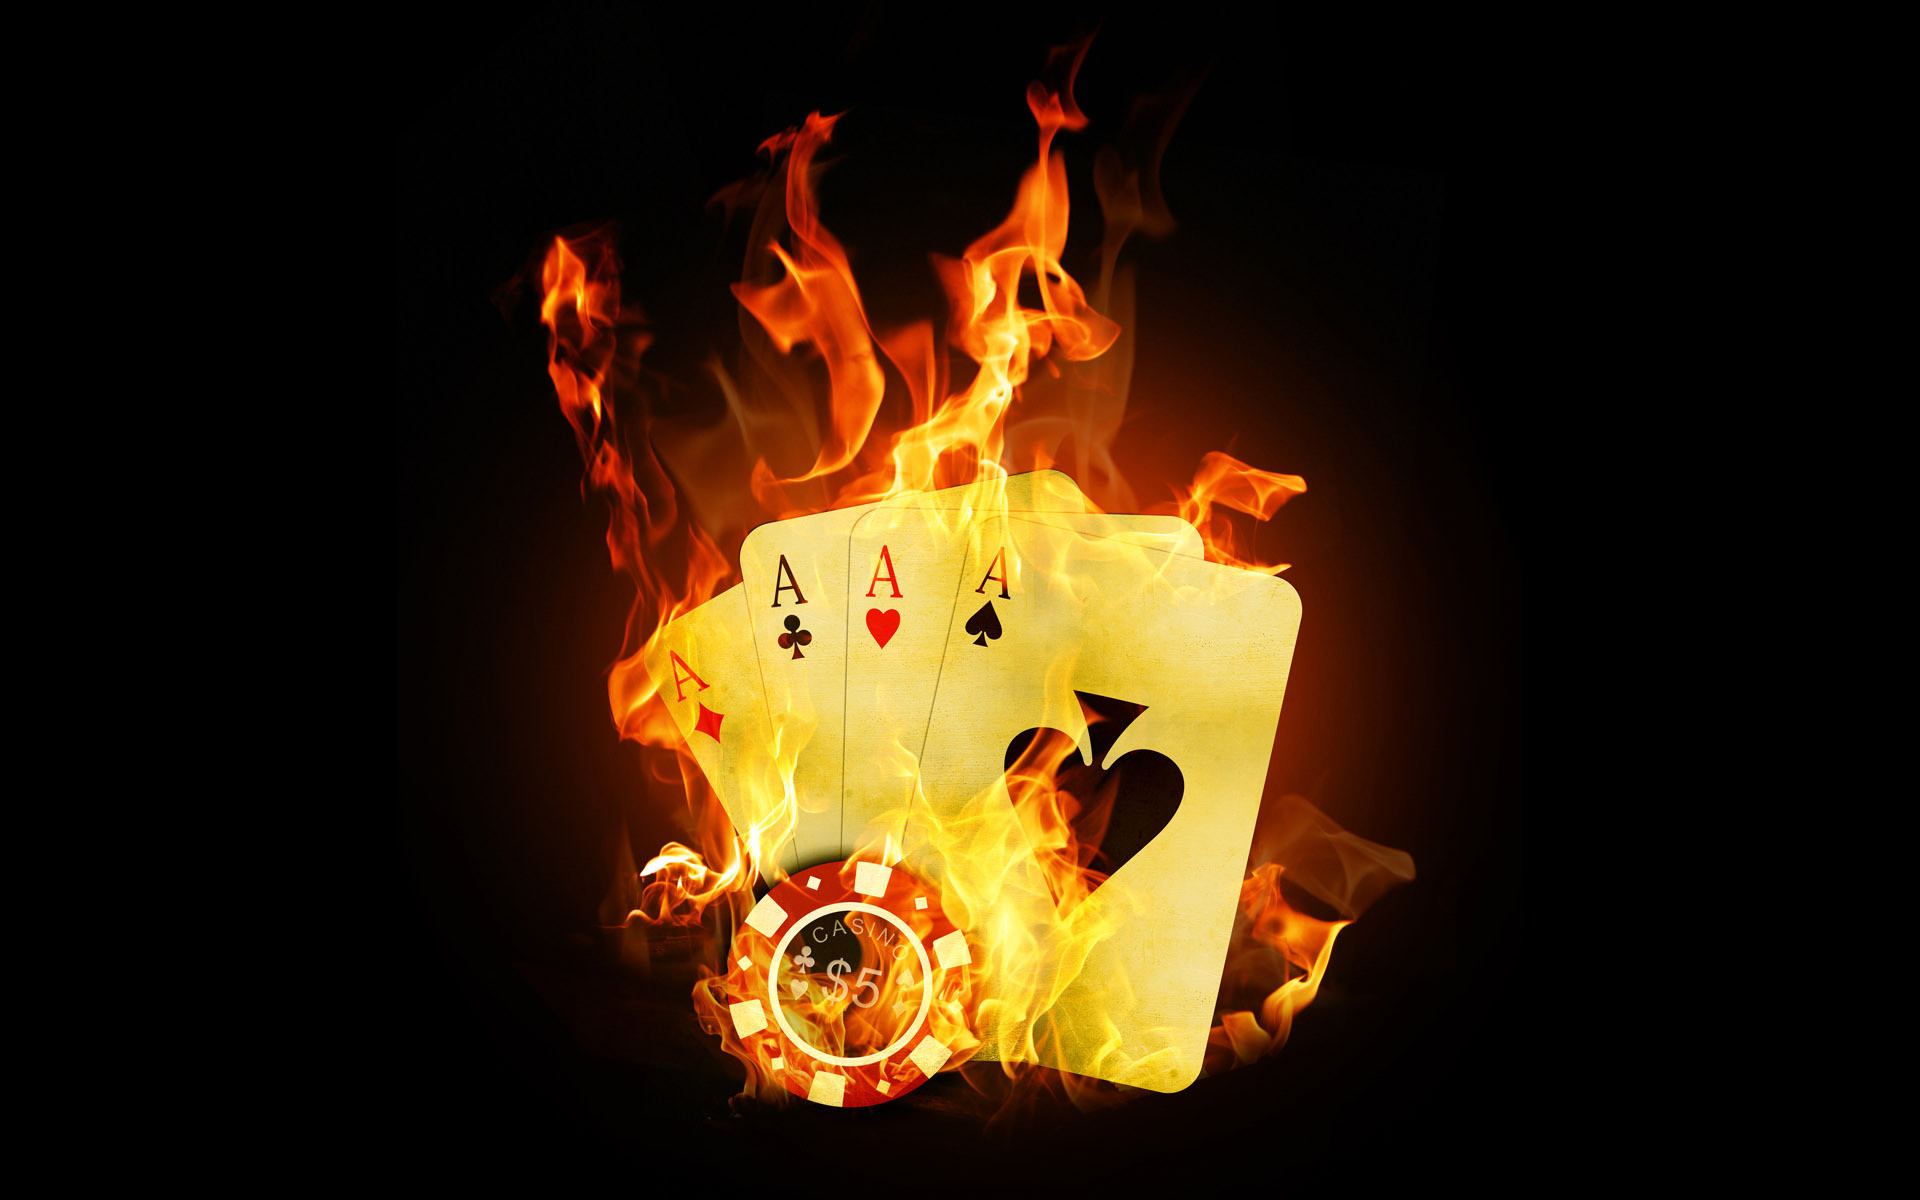 1920x1200 Symbol: Poker cards on fire This represents the poker game nights and how  they always end up causing some sort of destruction like the fire in the  photo.